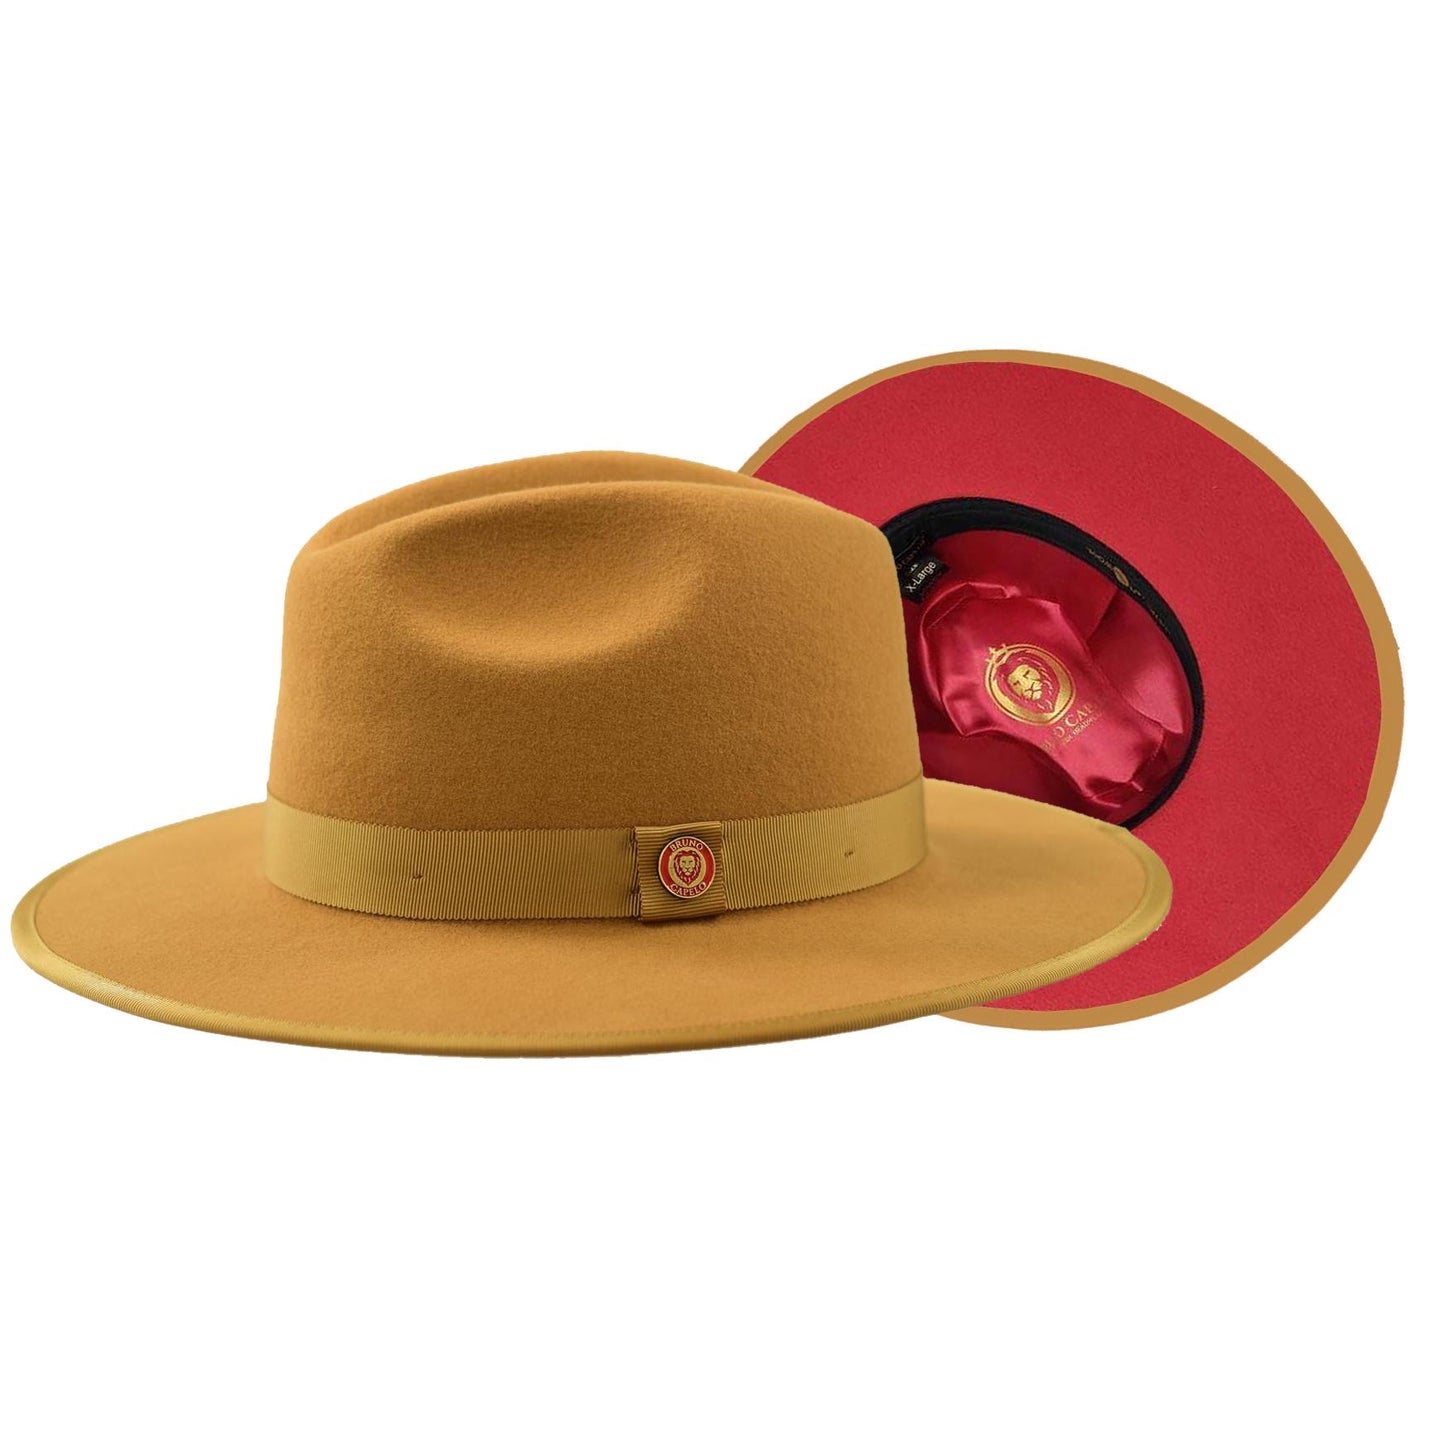 The Don wide brim Hat